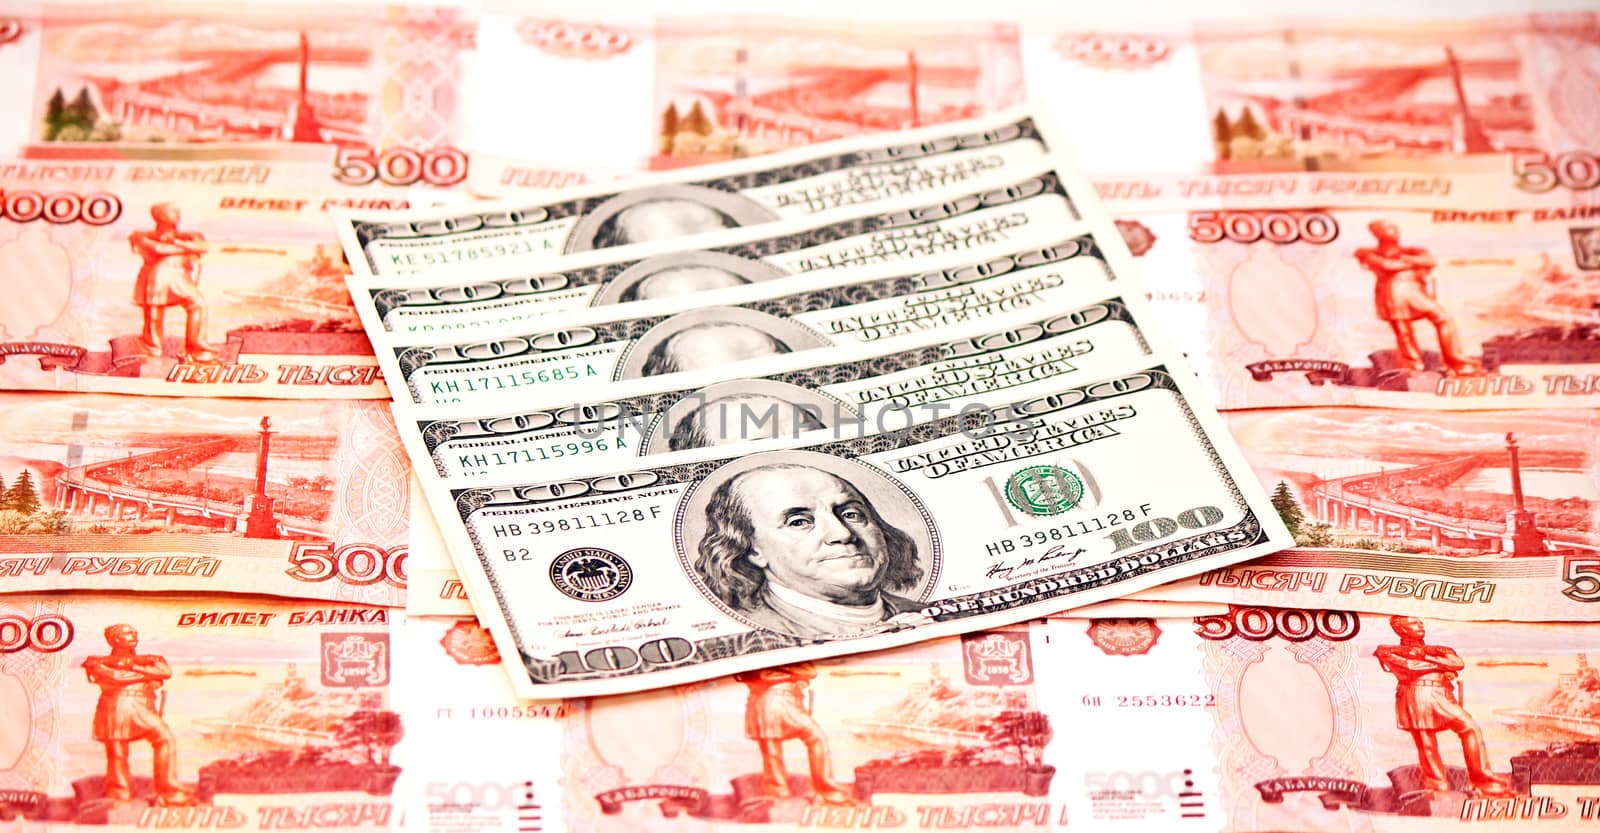 Two currencies - US Dollar and ruble
